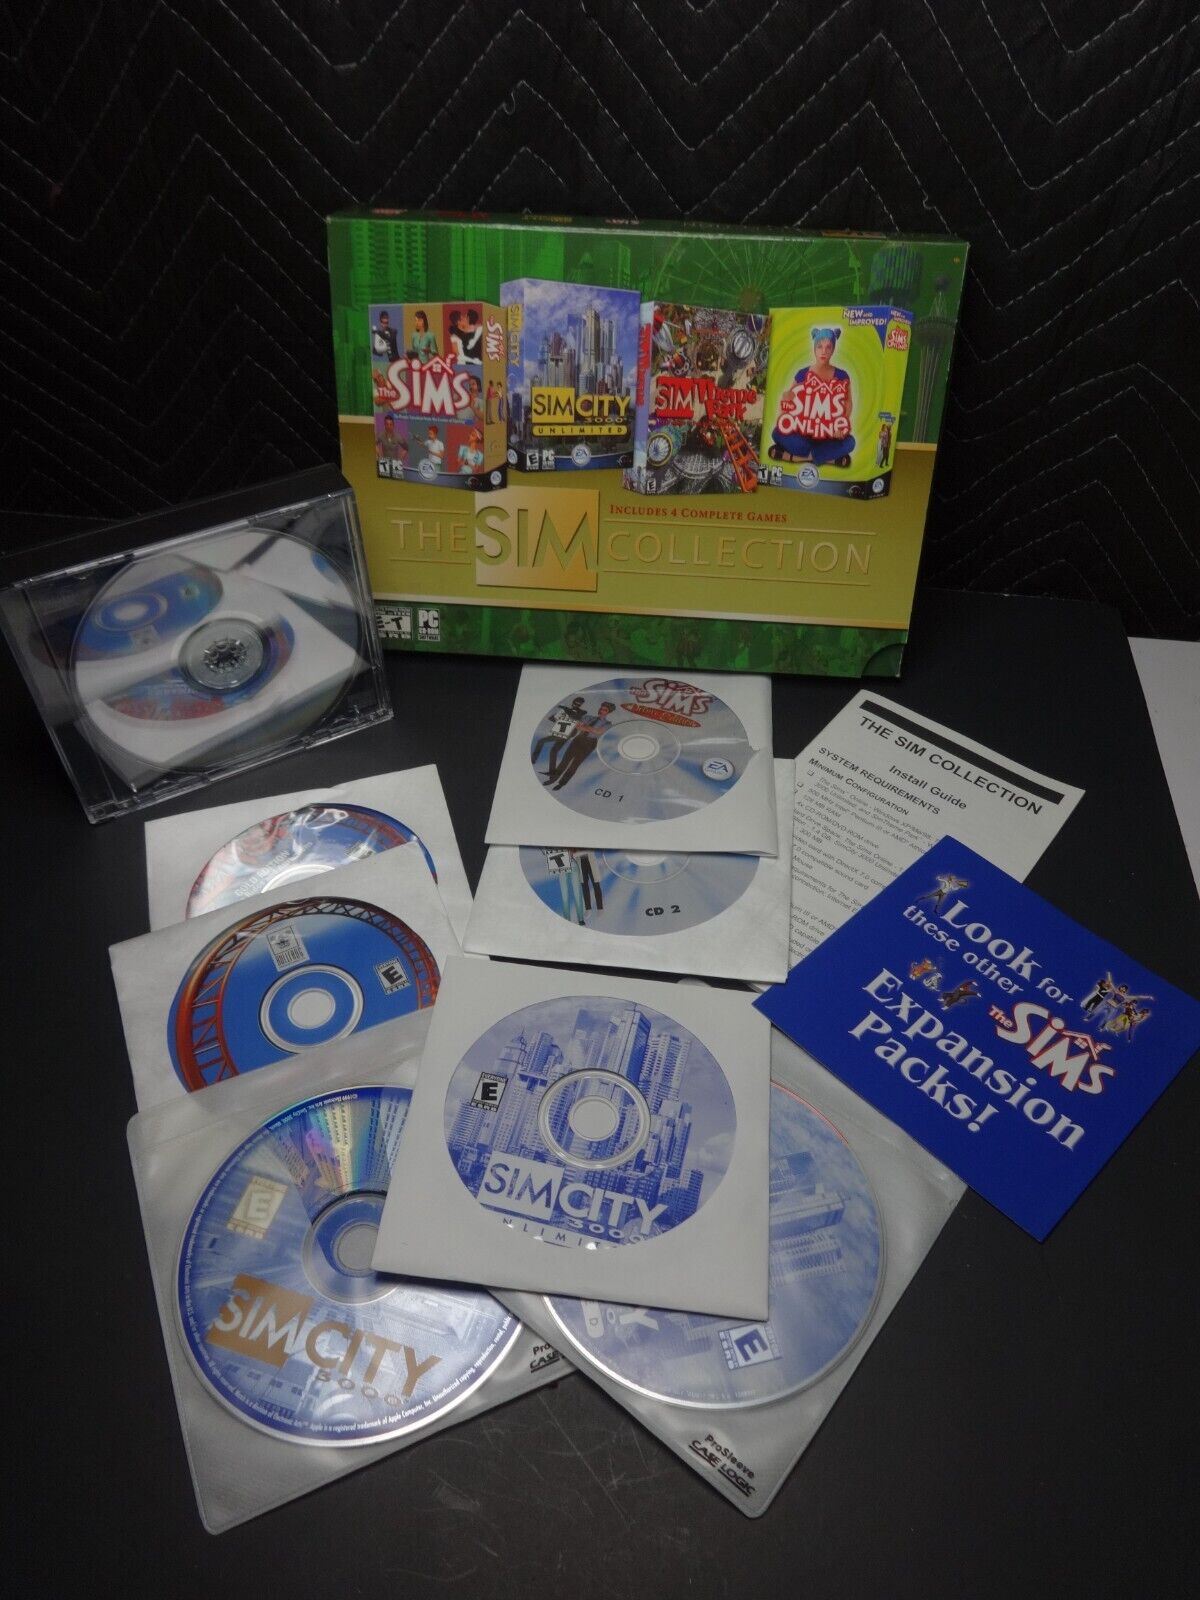 The SIM Collection Theme Park SimCity 3000 The Sims Deluxe The Sims Online